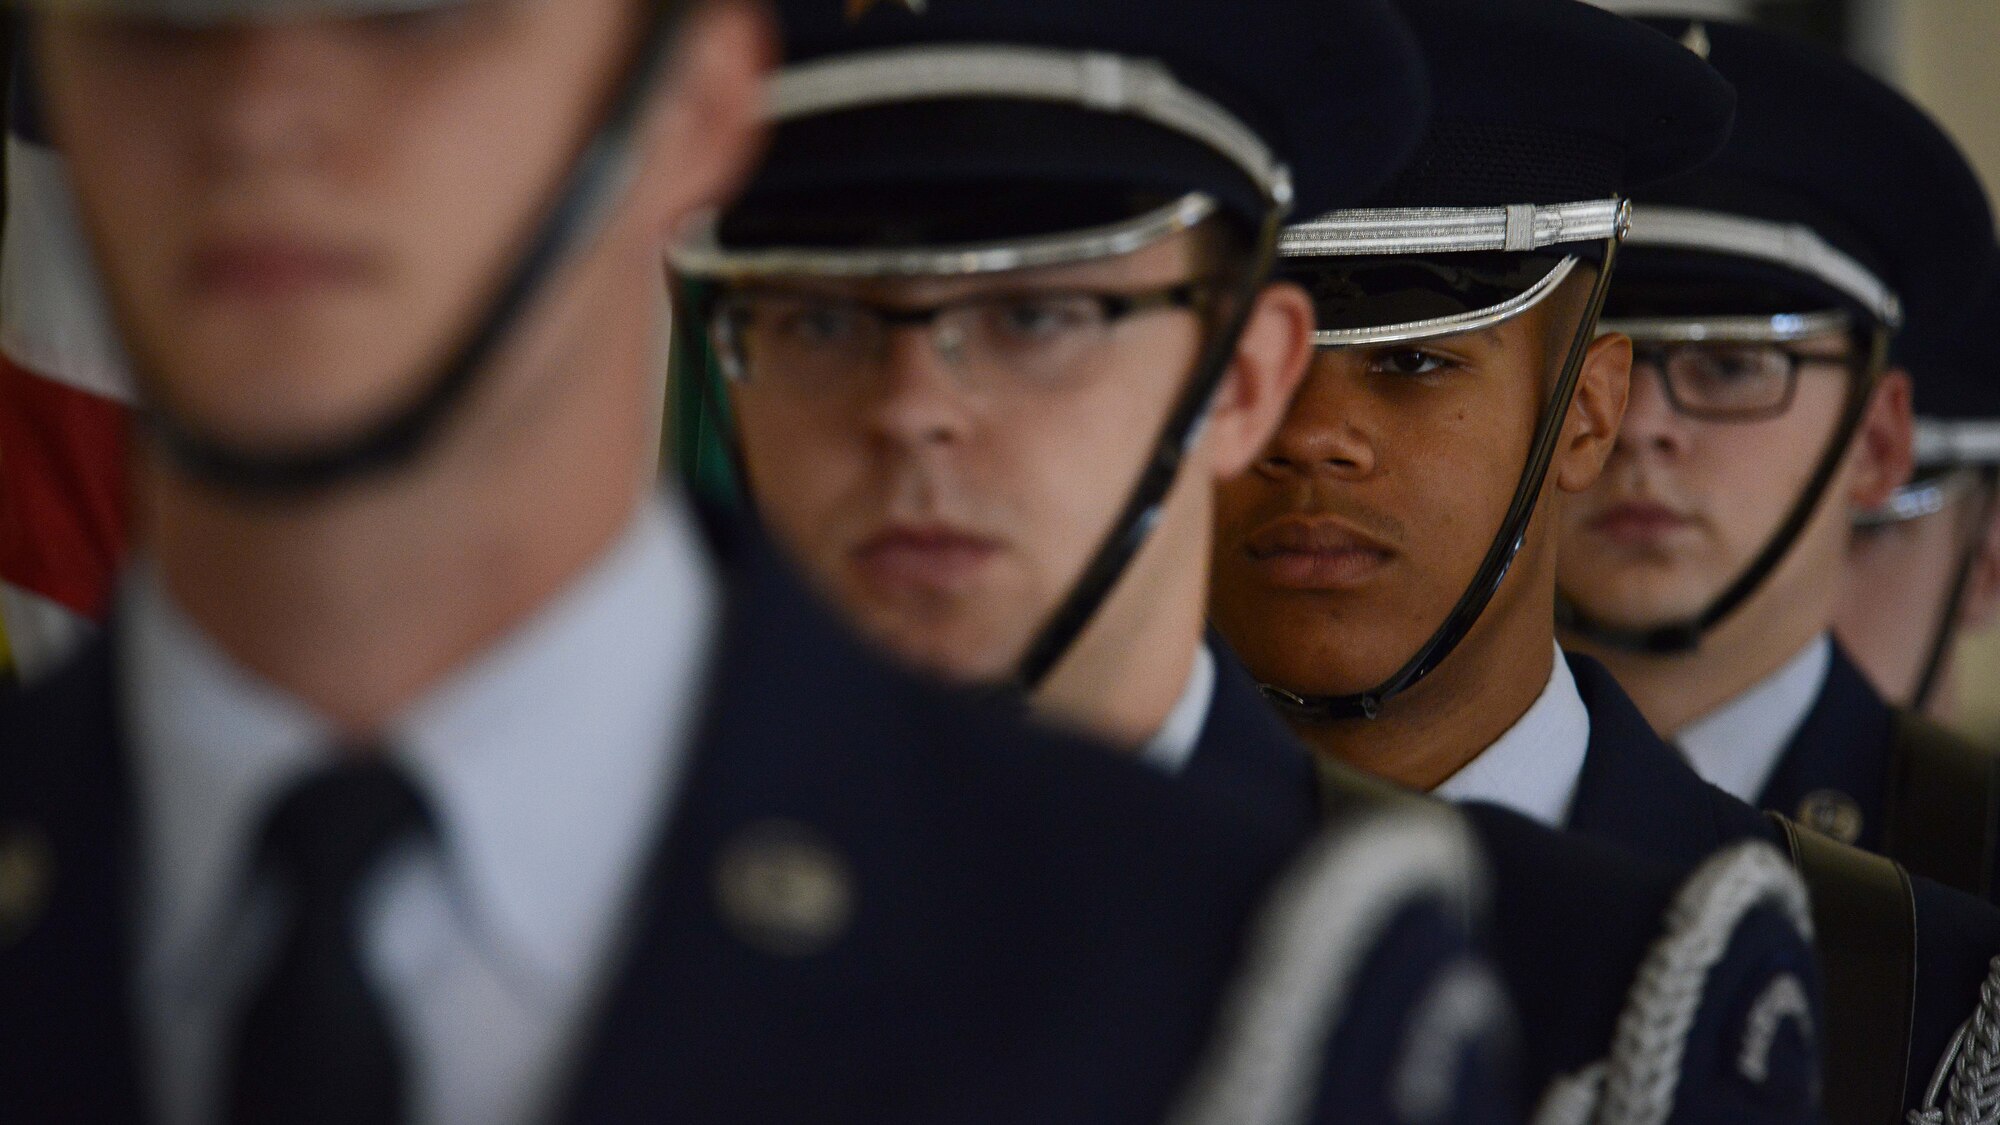 Members of the 31st Fighter Wing Honor Guard prepare to present the colors during the Prisoner of War/Missing in Action Remembrance Week Missing Man Table tribute ceremony, Sept. 15, 2015, at Aviano Air Base, Italy. According to the Defense POW/MIA Accounting Agency, there are still 83,114 service members, since World War II, who are unaccounted for. (U.S. Air Force photo by Staff Sgt. Evelyn Chavez/Released)